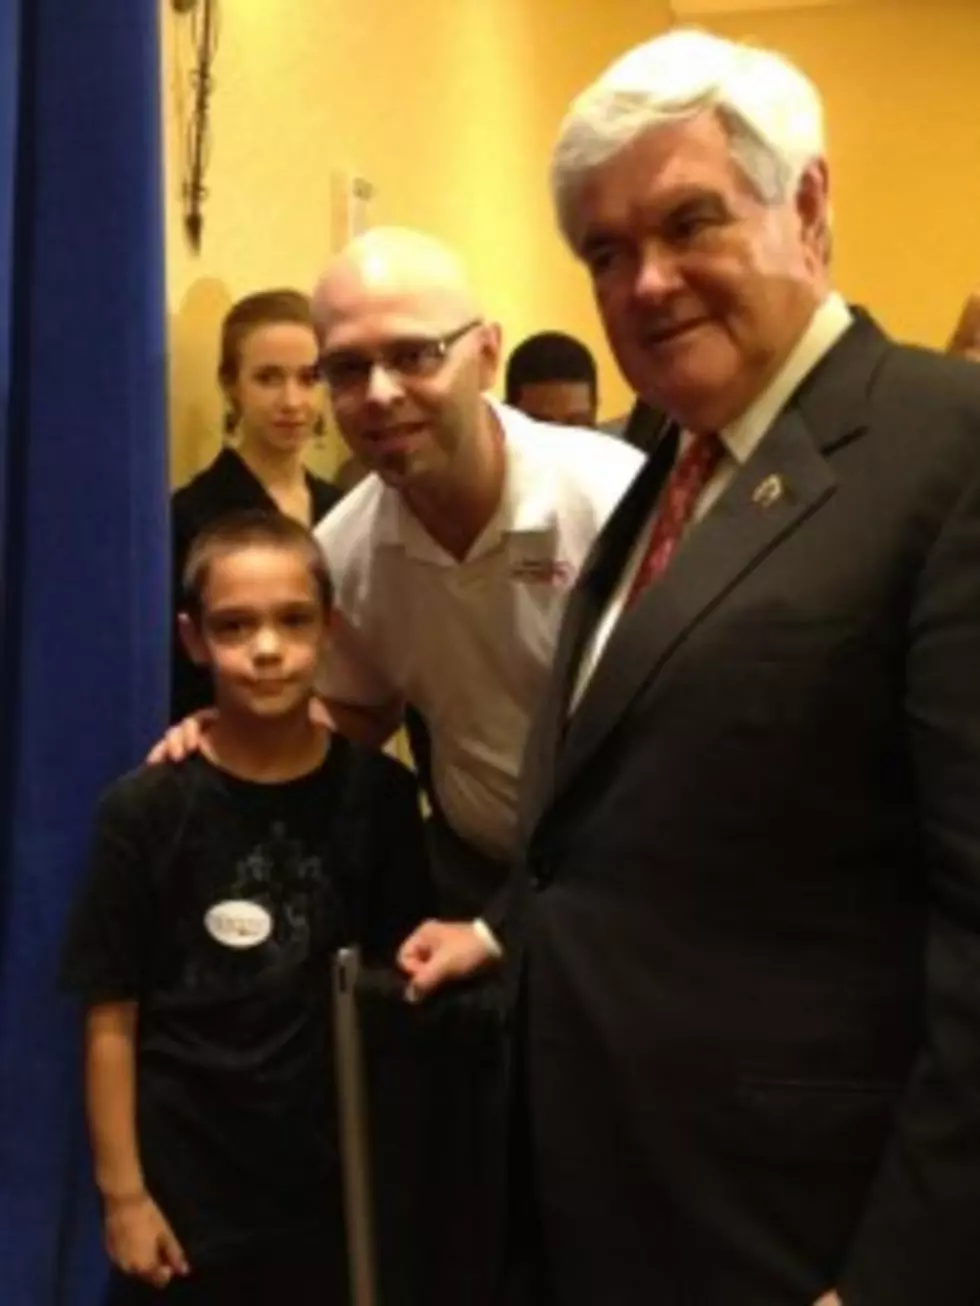 Newt Gingrich Resorts to Charging His Supporters to Take Pictures